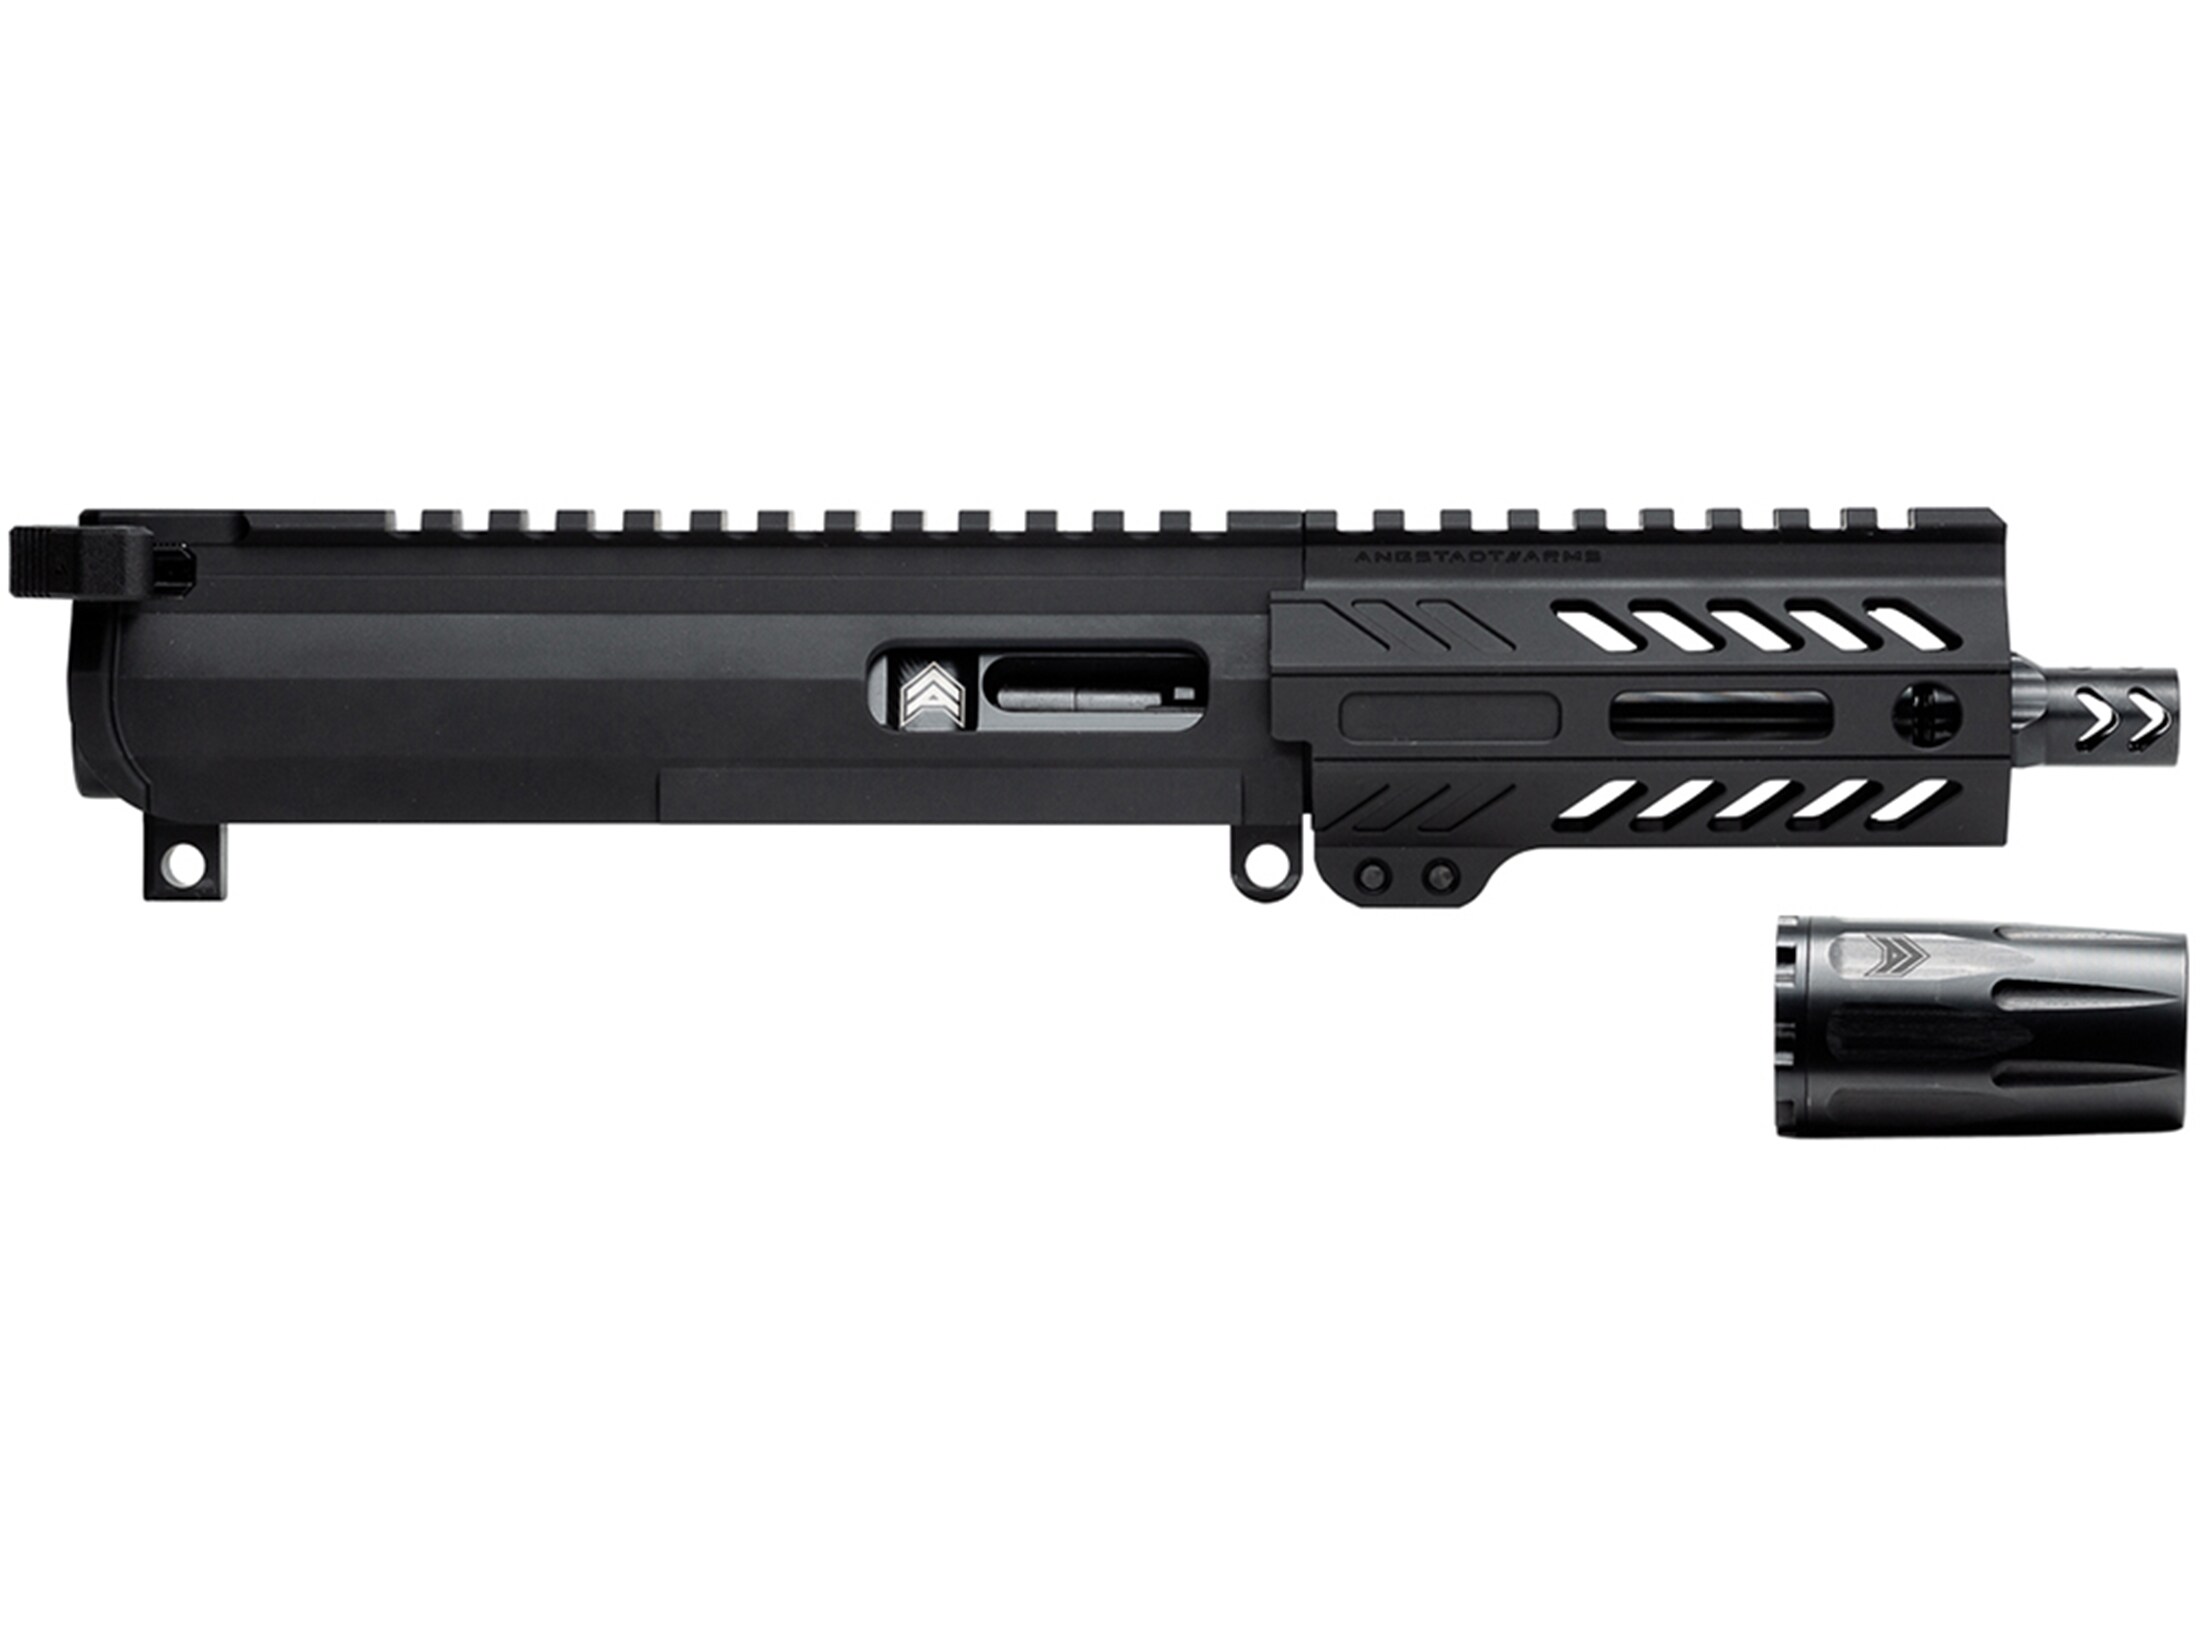 Angstadt Arms AR-15 Suppressor Ready Pistol Upper Receiver Assembly